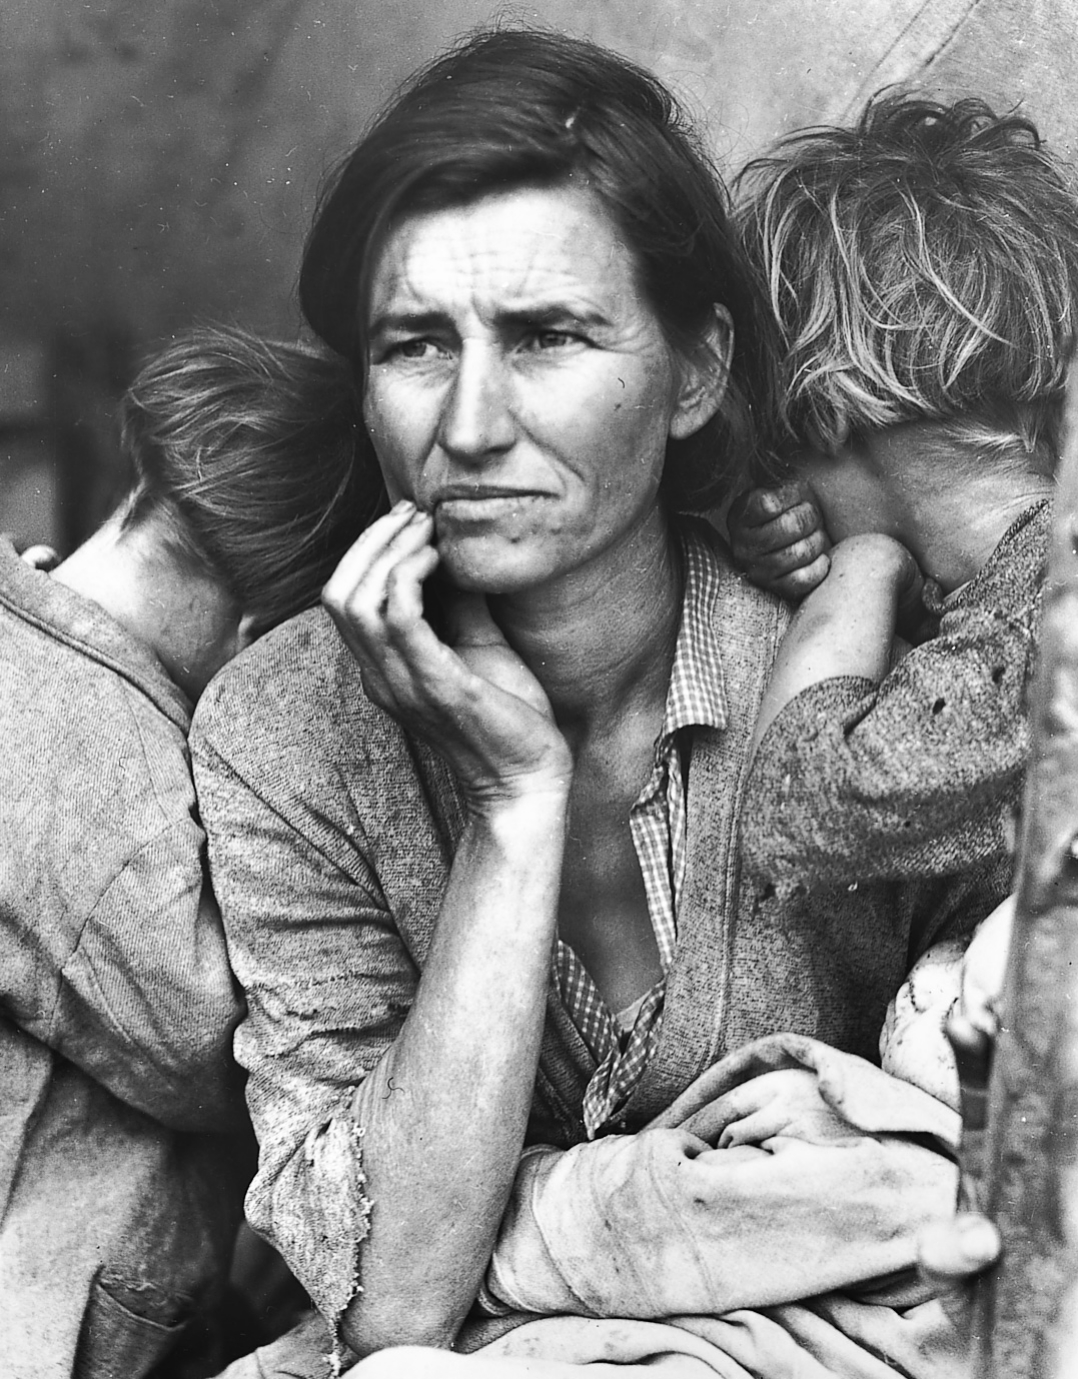 Black and white image of a woman looking into the distance with two children clung to her.